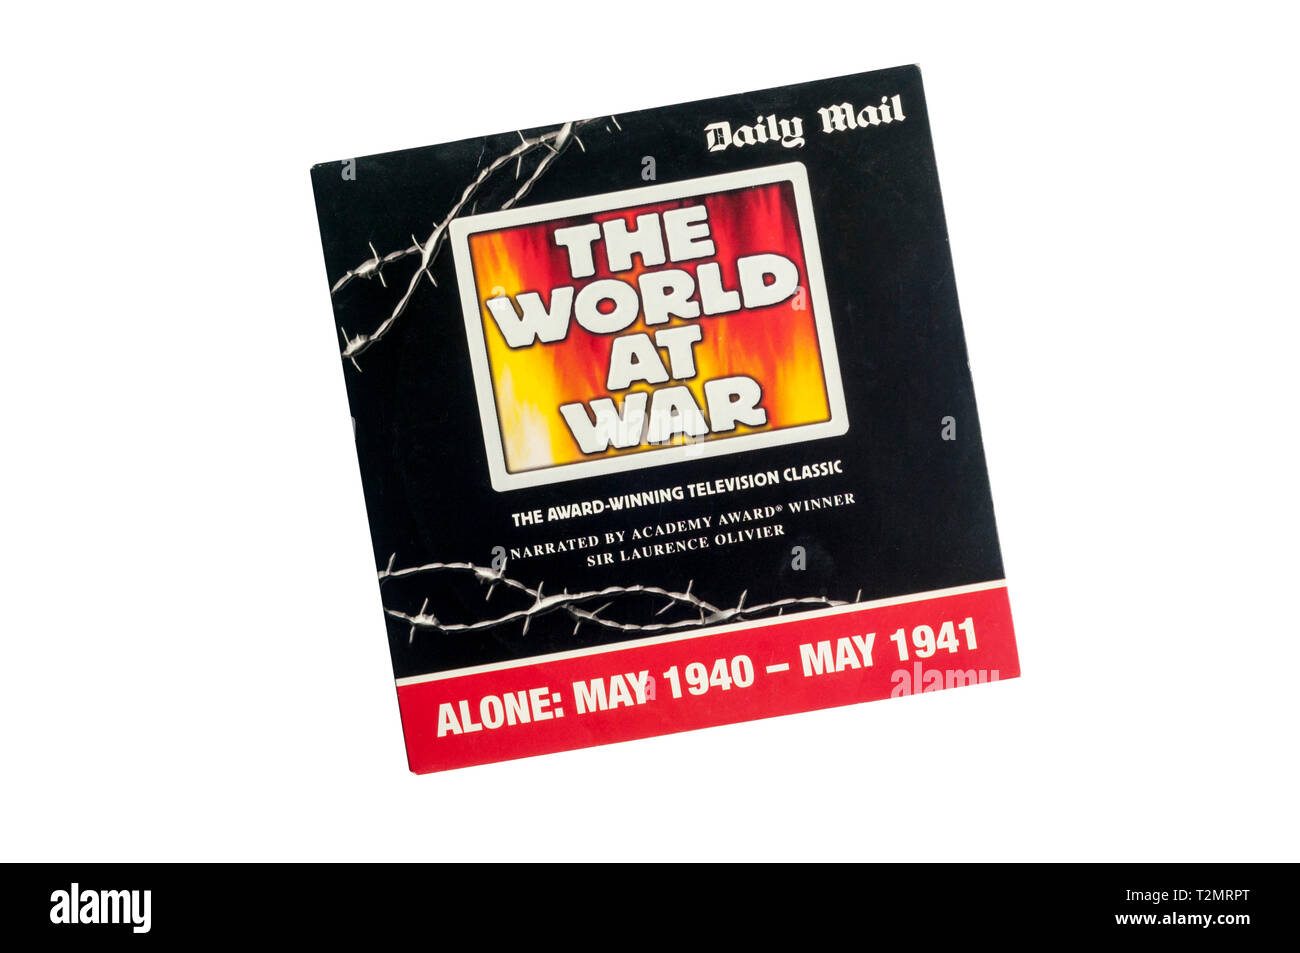 A copy of the 1970s TV series The World at War given free on DVD with the Daily Mail newspaper. Stock Photo